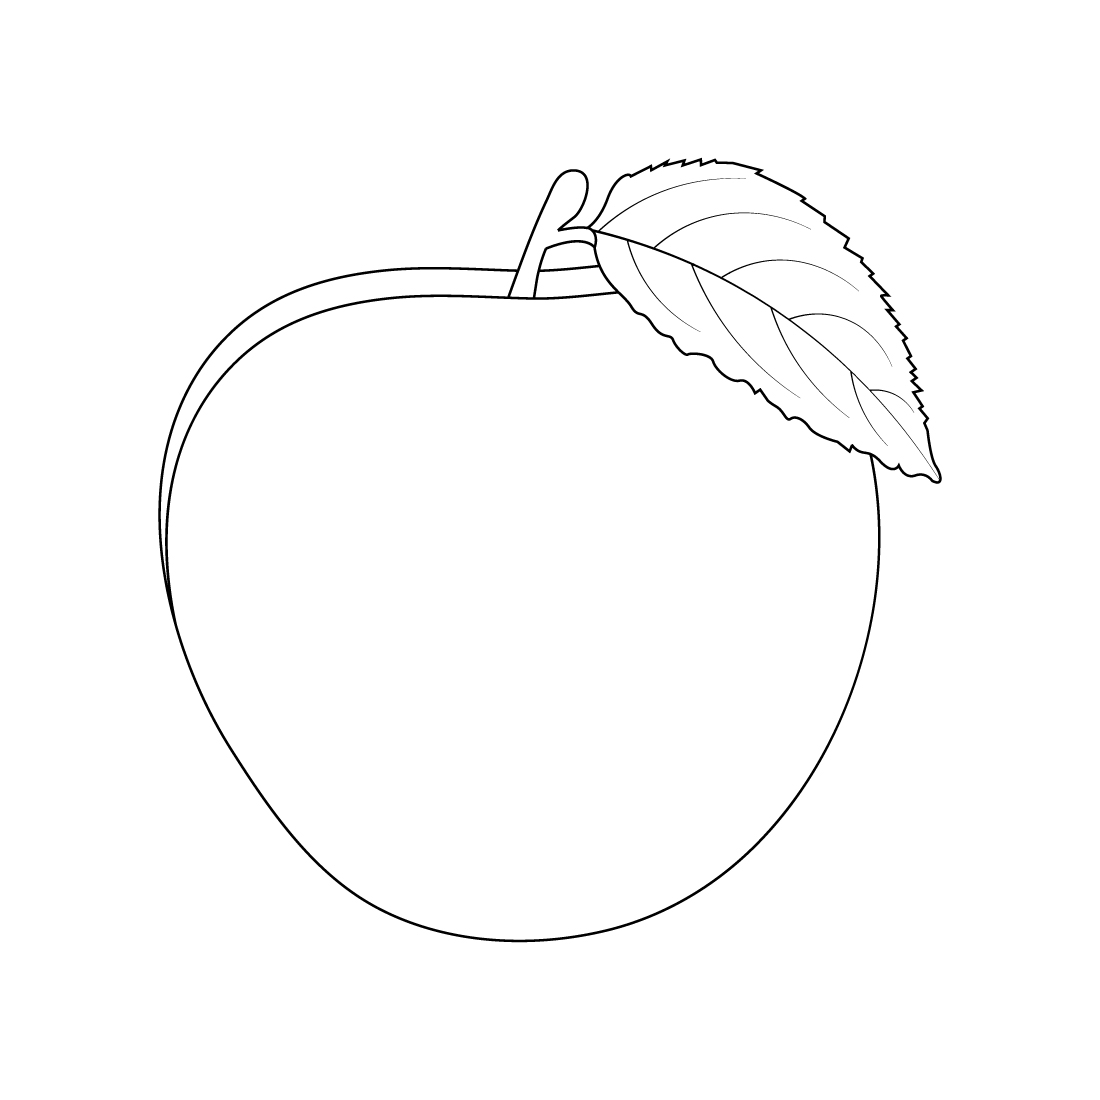 Apple Fruits Coloring Page For Kids cover image.